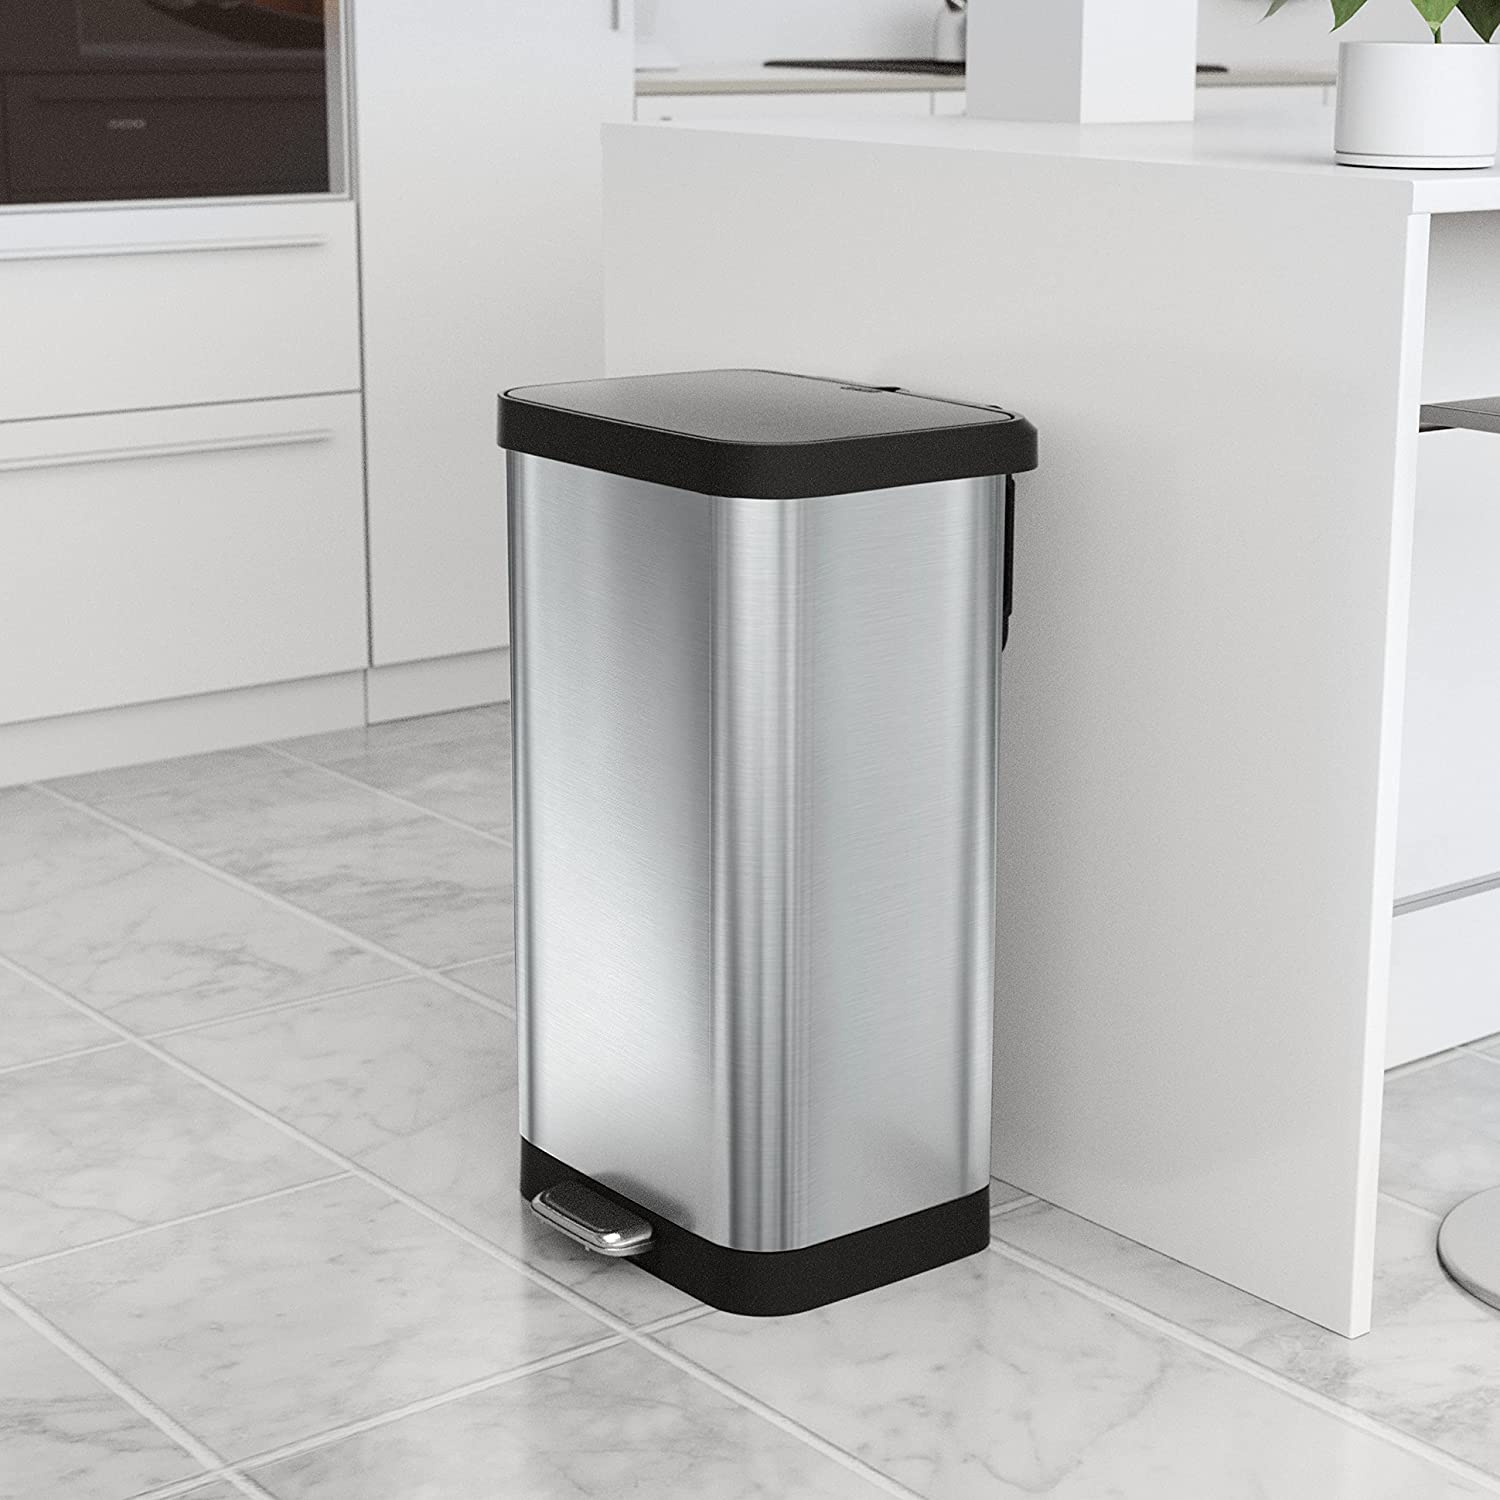 Glad Stainless Steel Step Trash Can with Clorox Odor Protection Review 